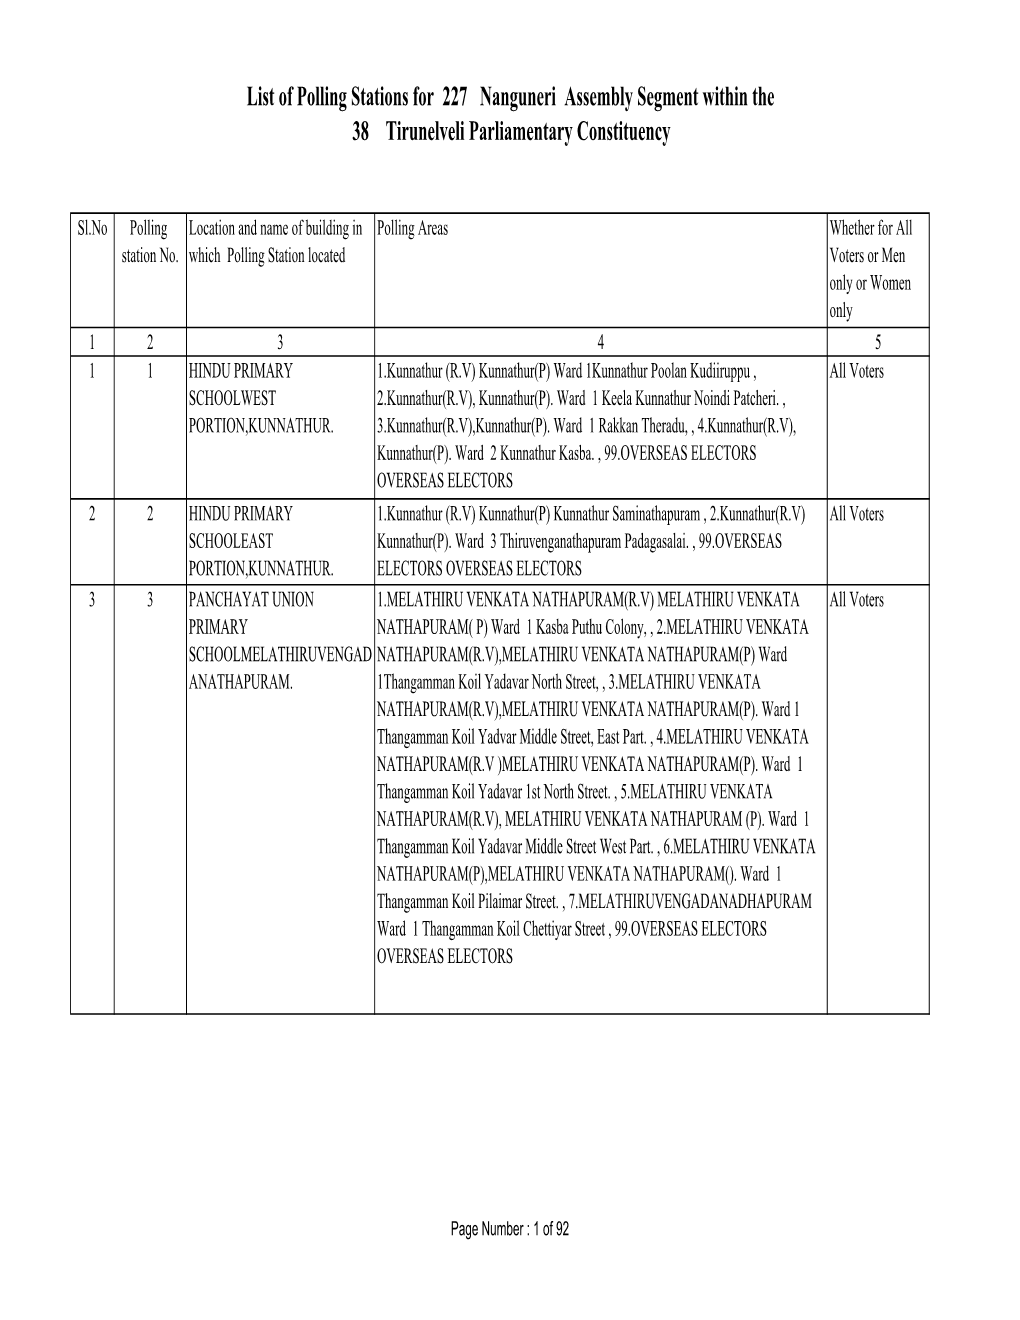 List of Polling Stations for 227 Nanguneri Assembly Segment Within the 38 Tirunelveli Parliamentary Constituency